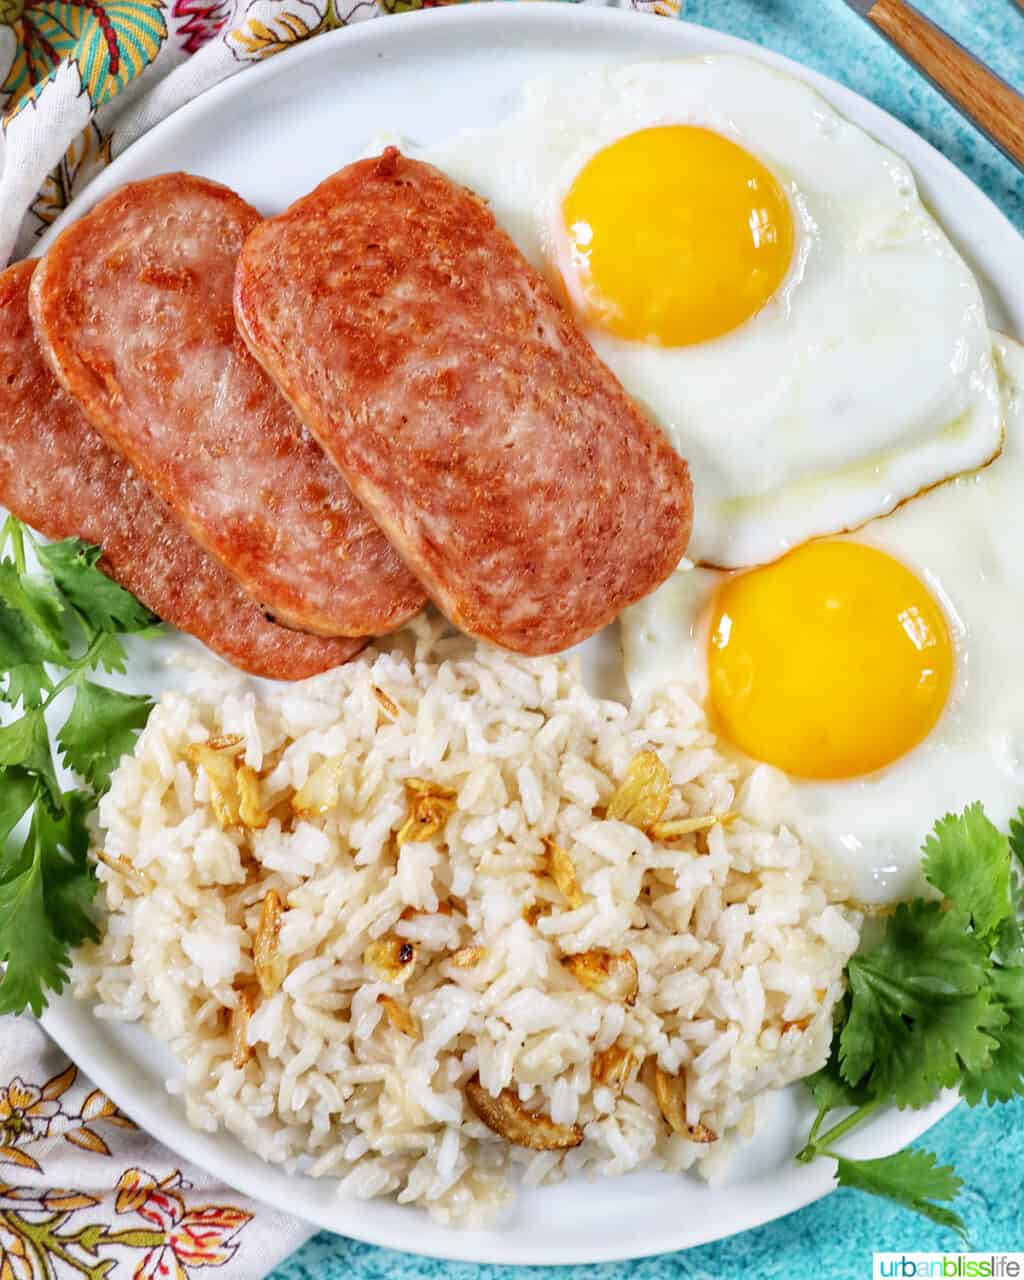 Plate of Spamsilog: slices of Spam, two eggs over easy, and Filipino Sinangag garlic rice with greens.